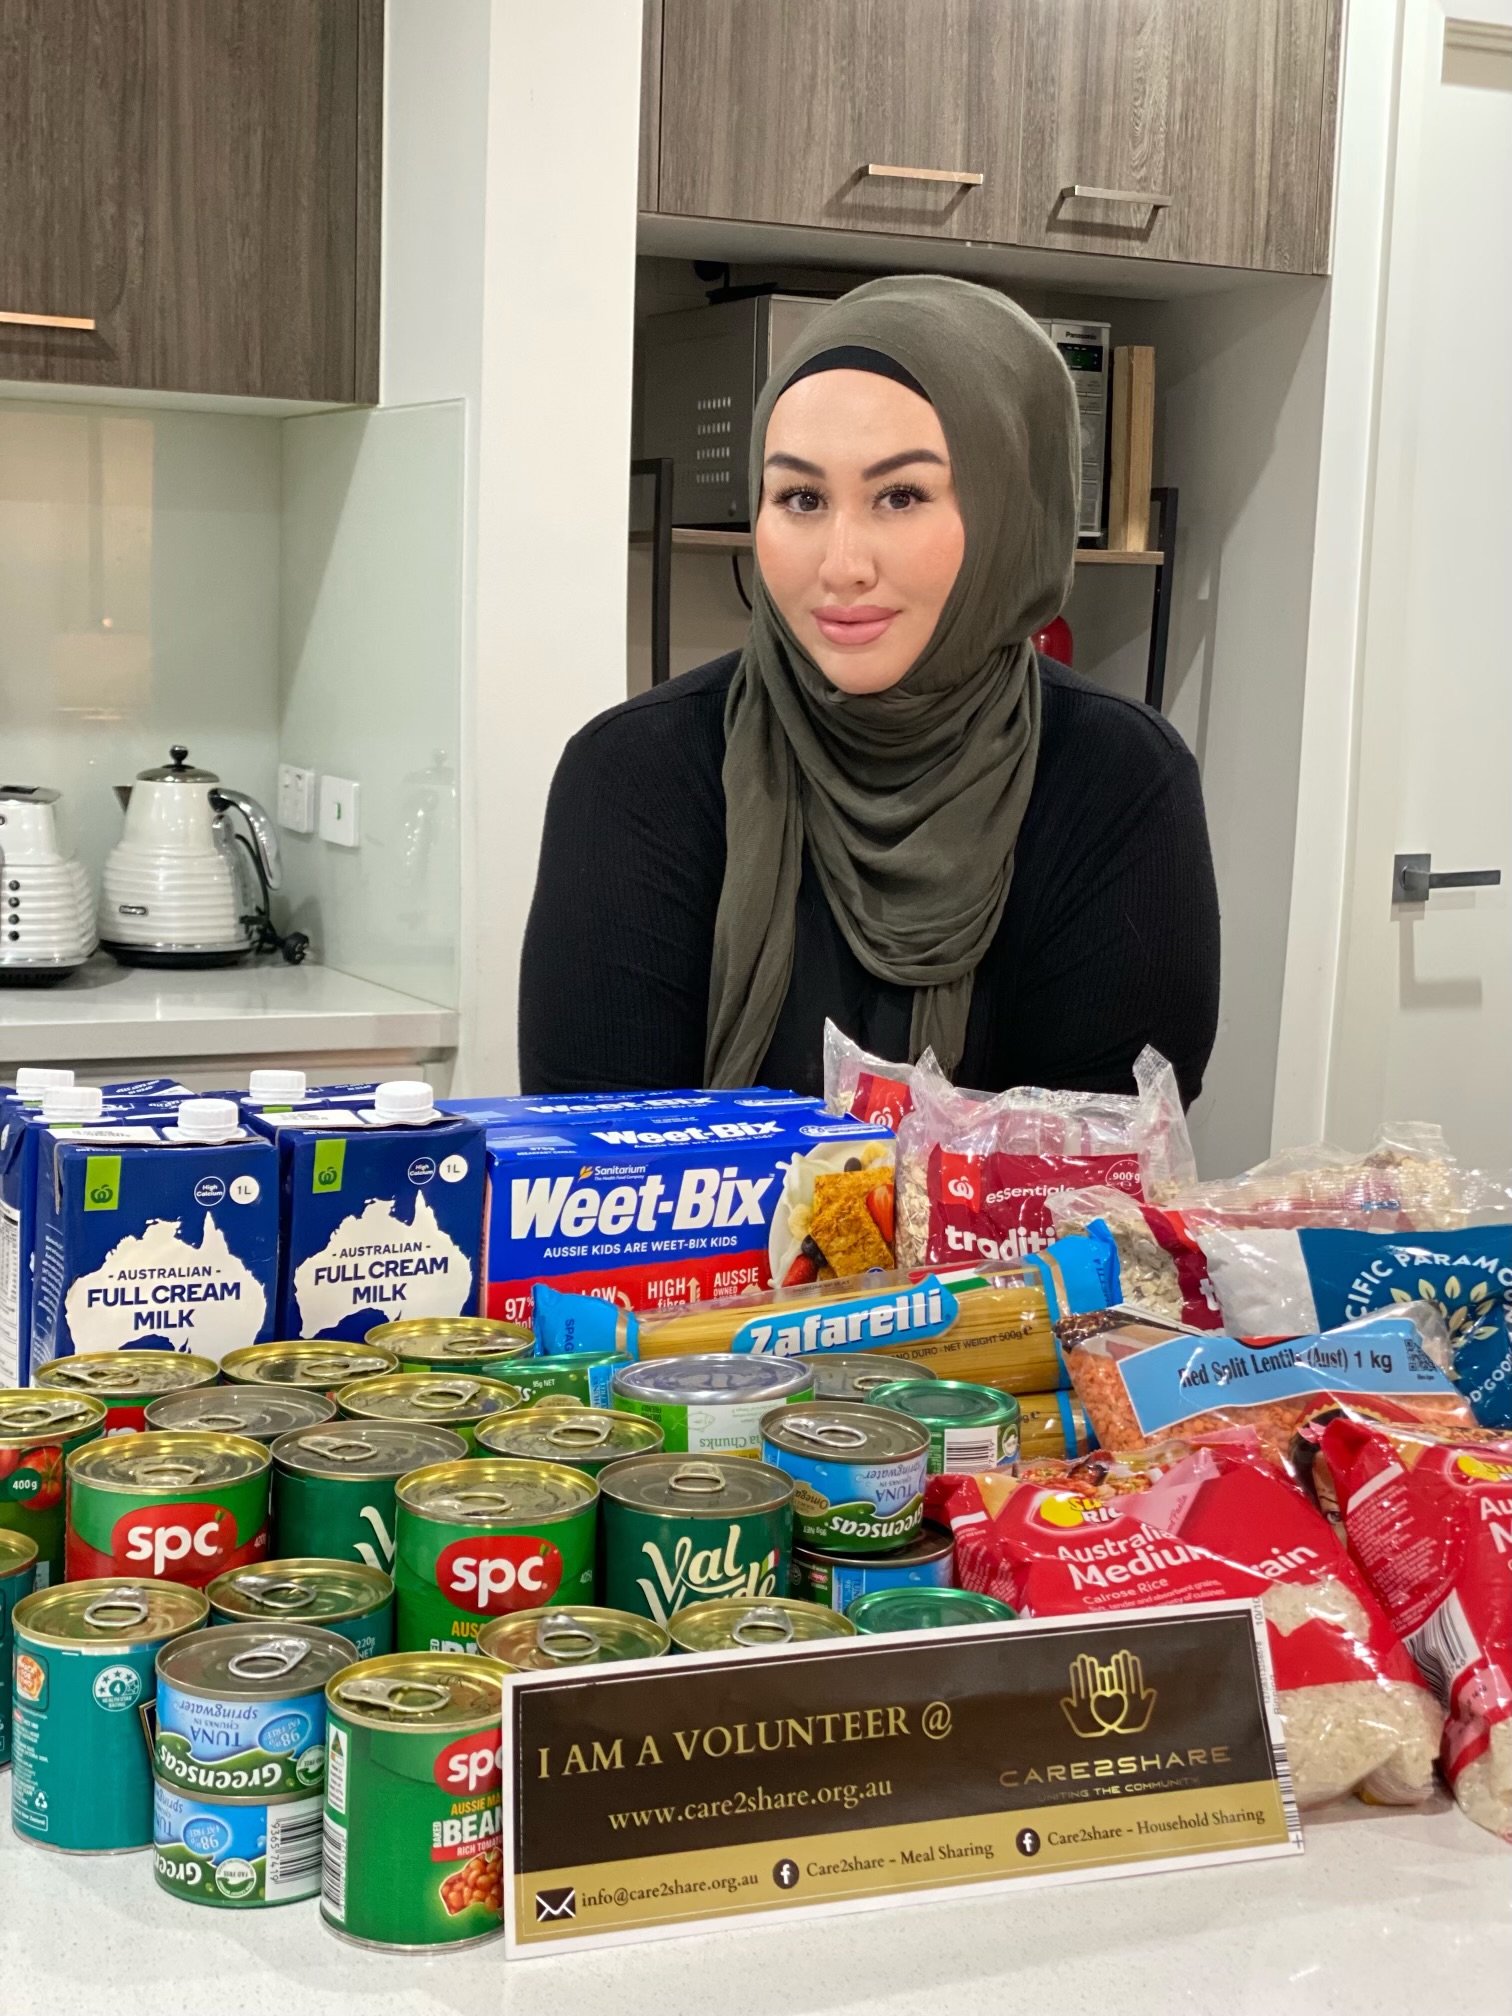 This is an image of Nabila Elrich with donated groceries.